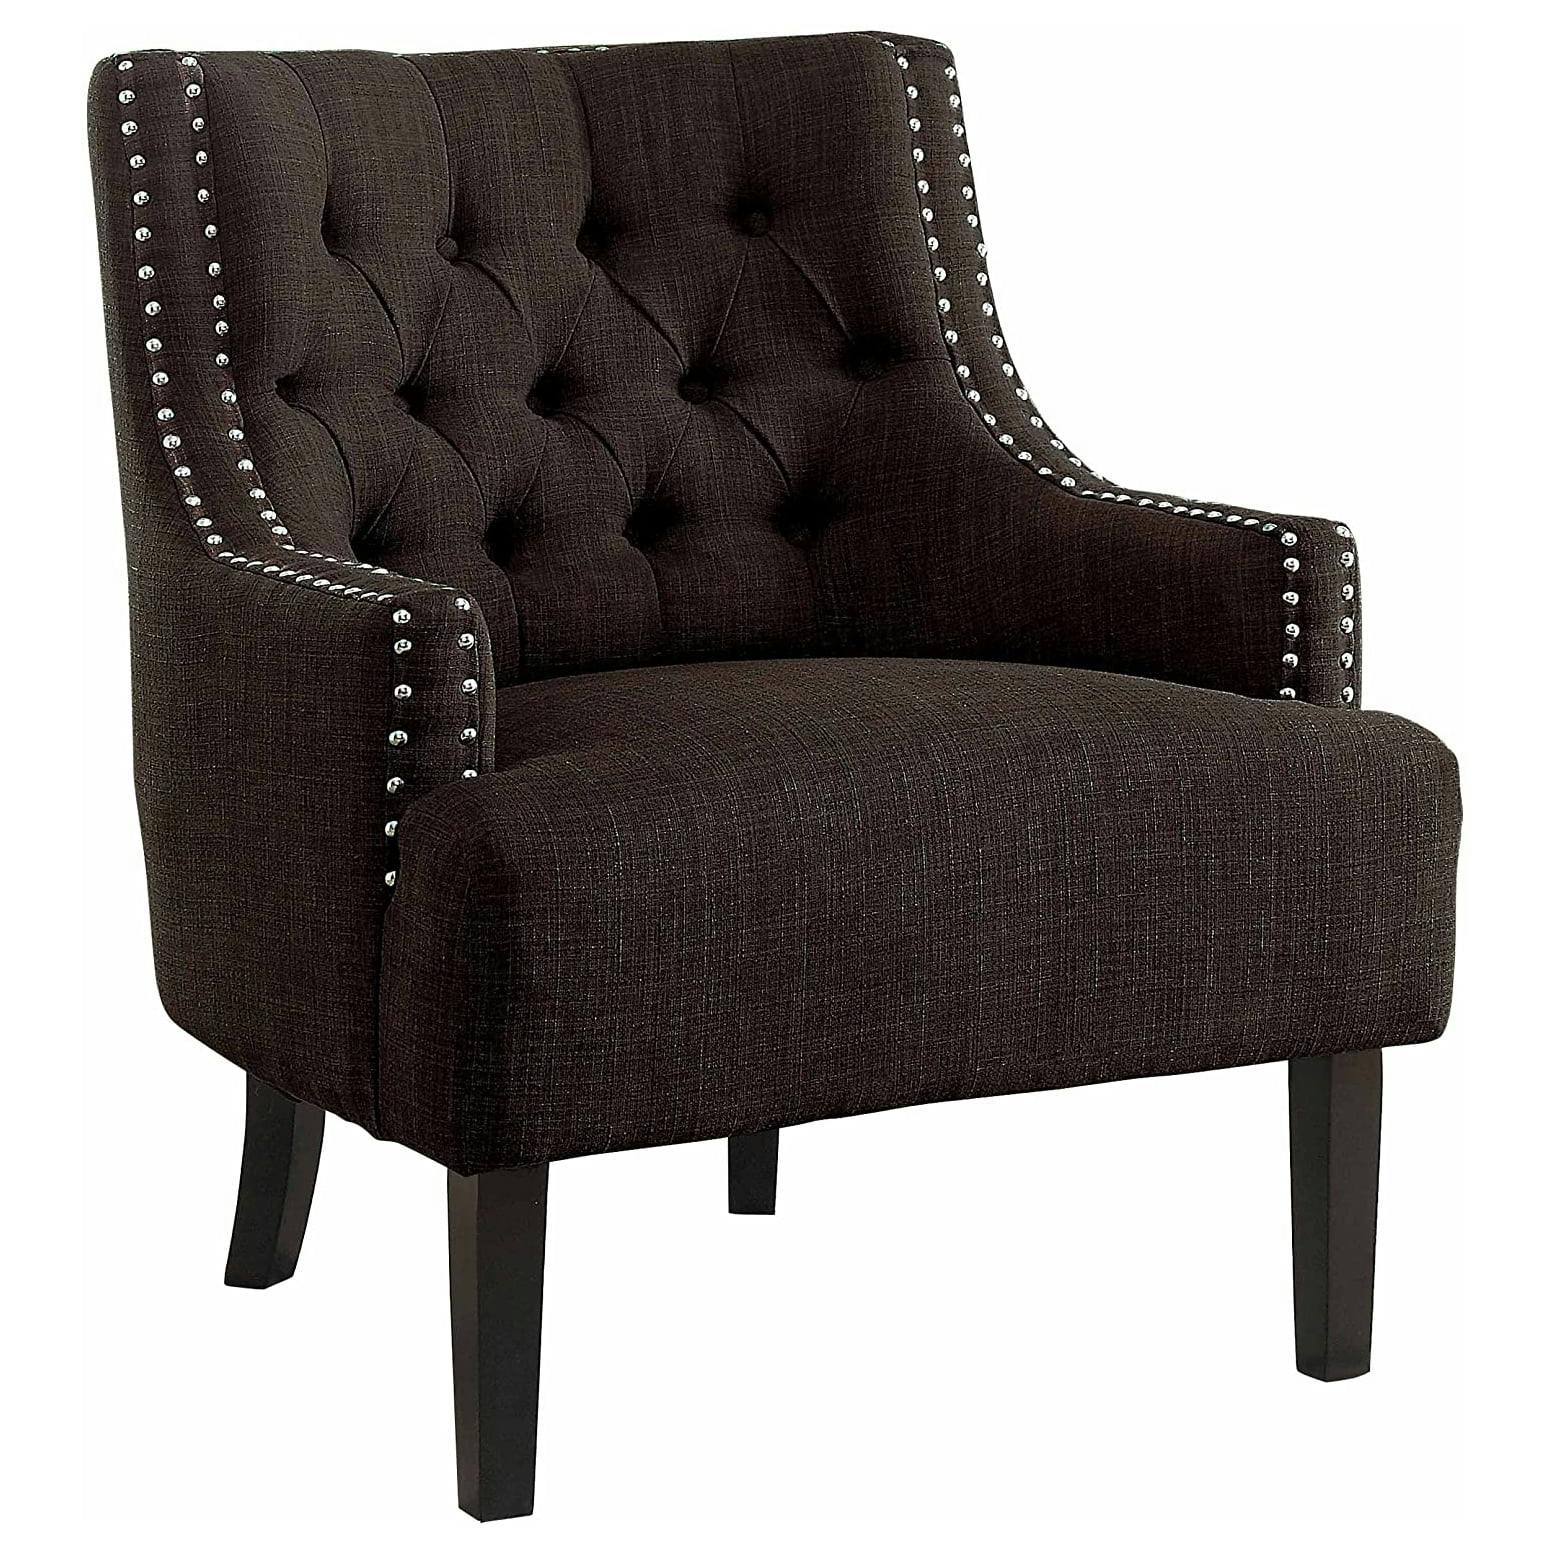 Transitional Chocolate Brown 28" Manufactured Wood Accent Chair